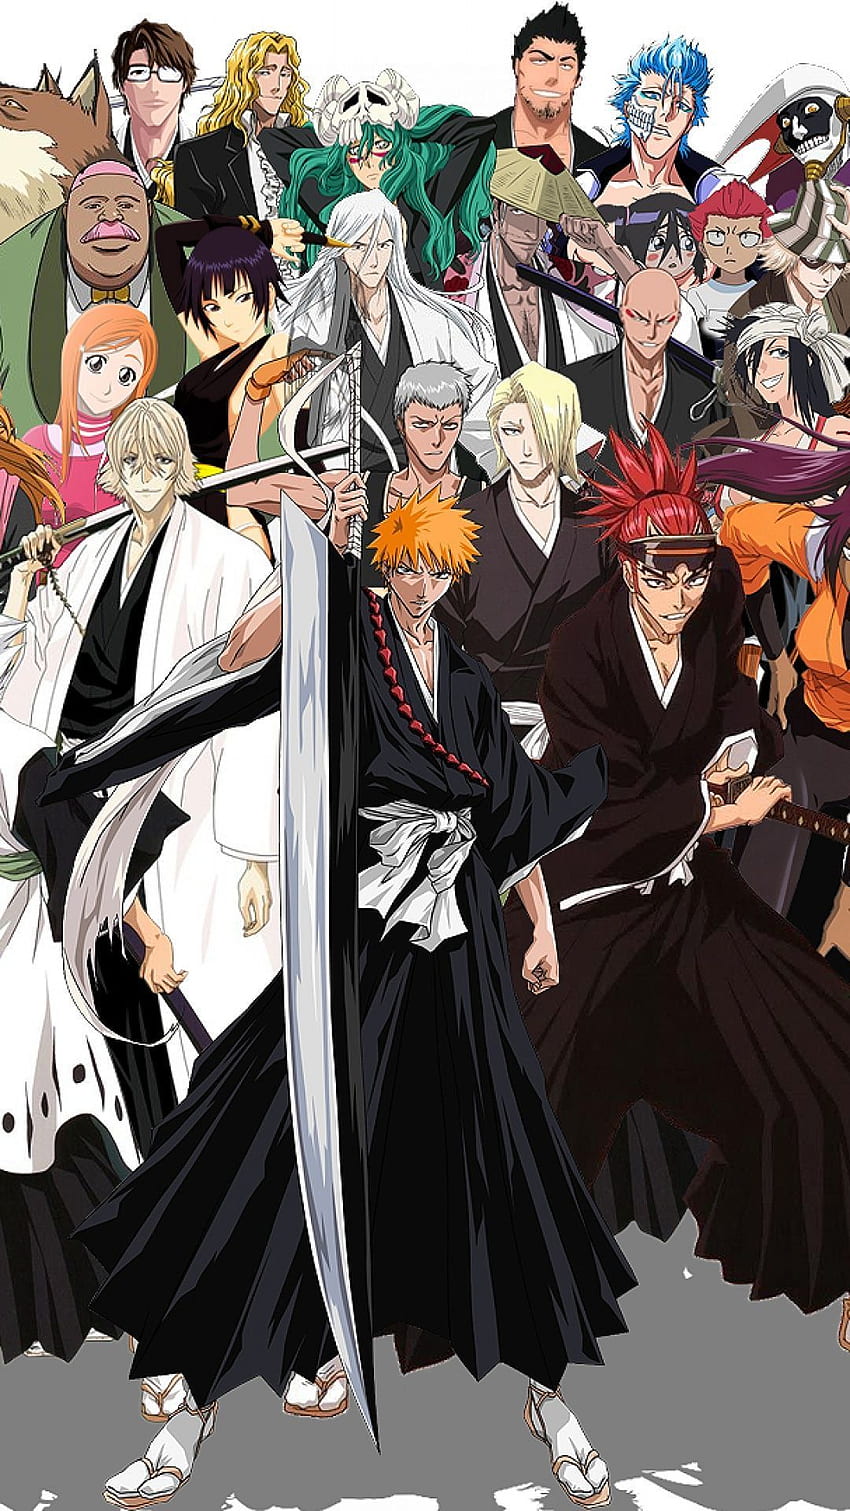 Top 20 Bleach Anime Wallpapers